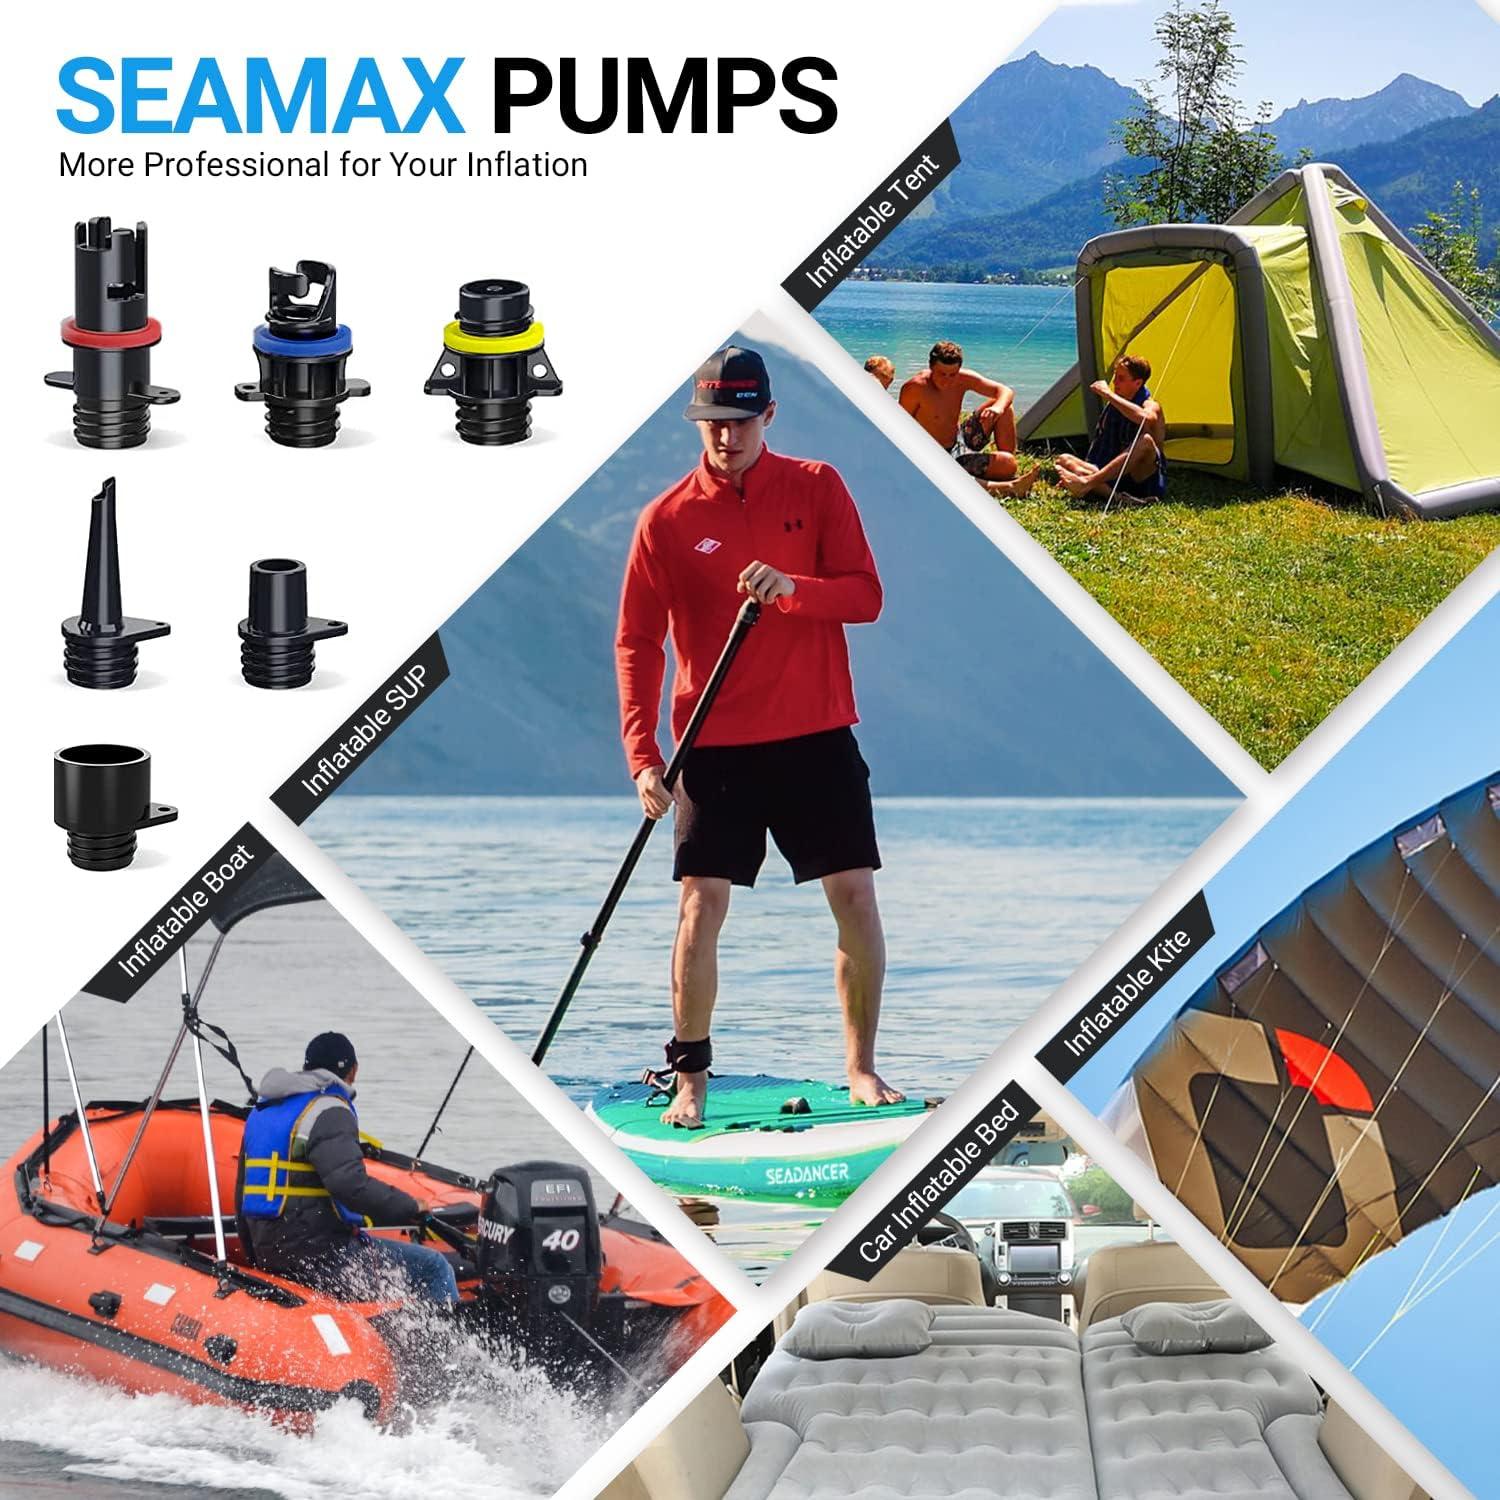 12V Electric SUP Pump for Paddleboard, Kite, and other inflatables